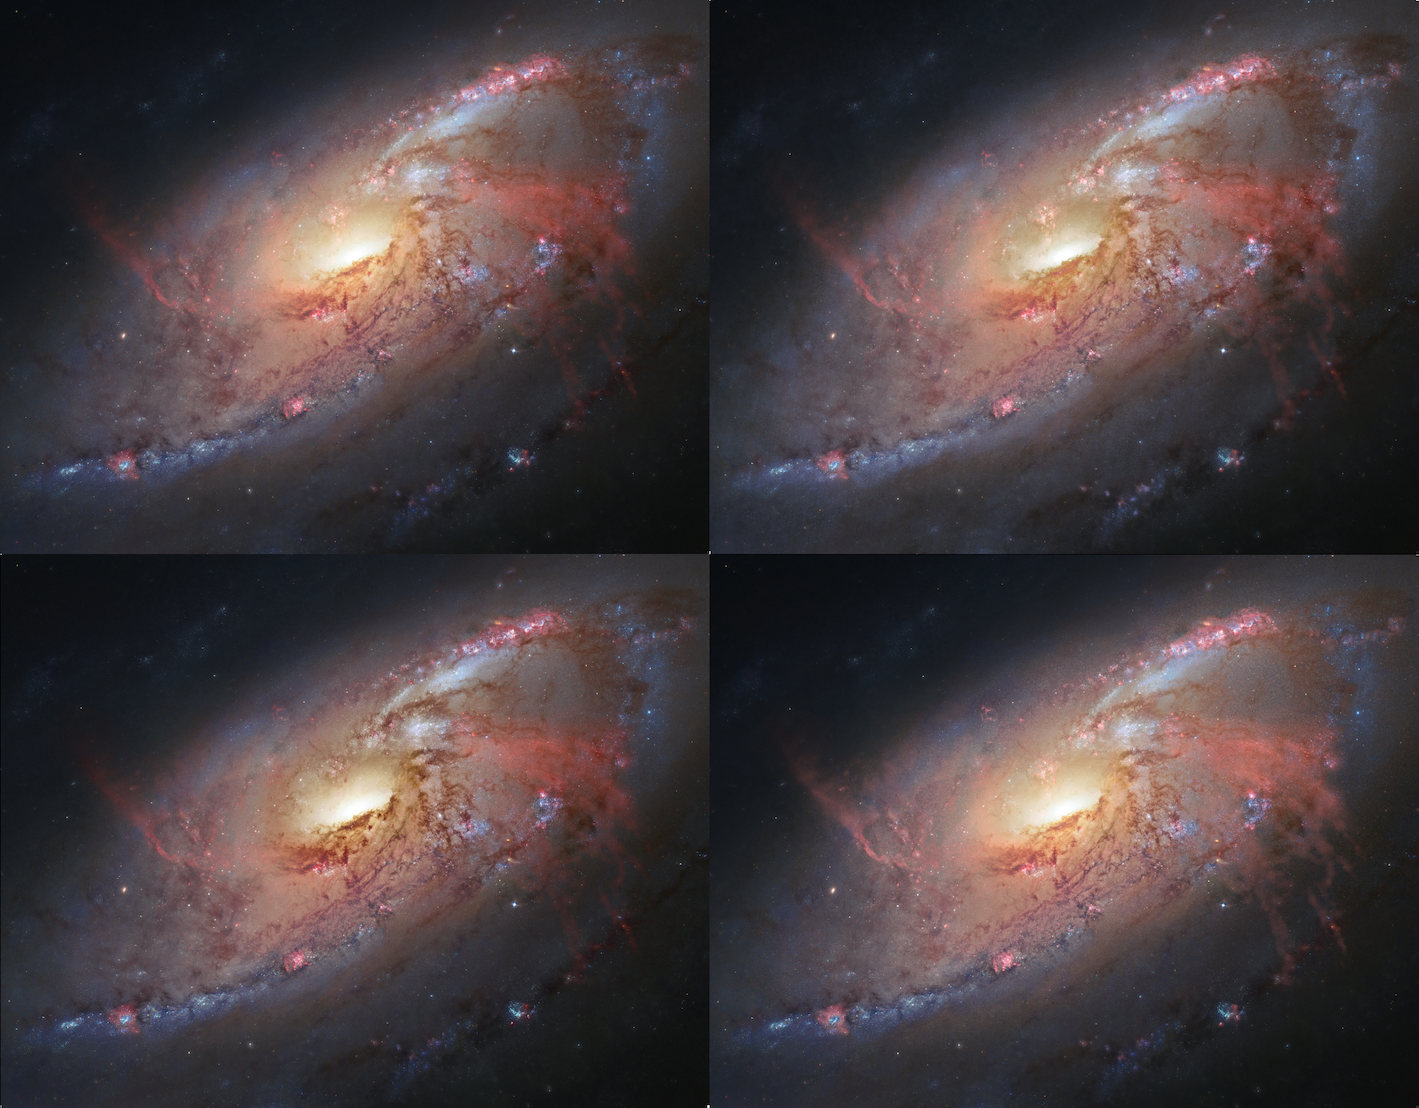 4-panel of the same image, 3 of which were processed by the Entropy module